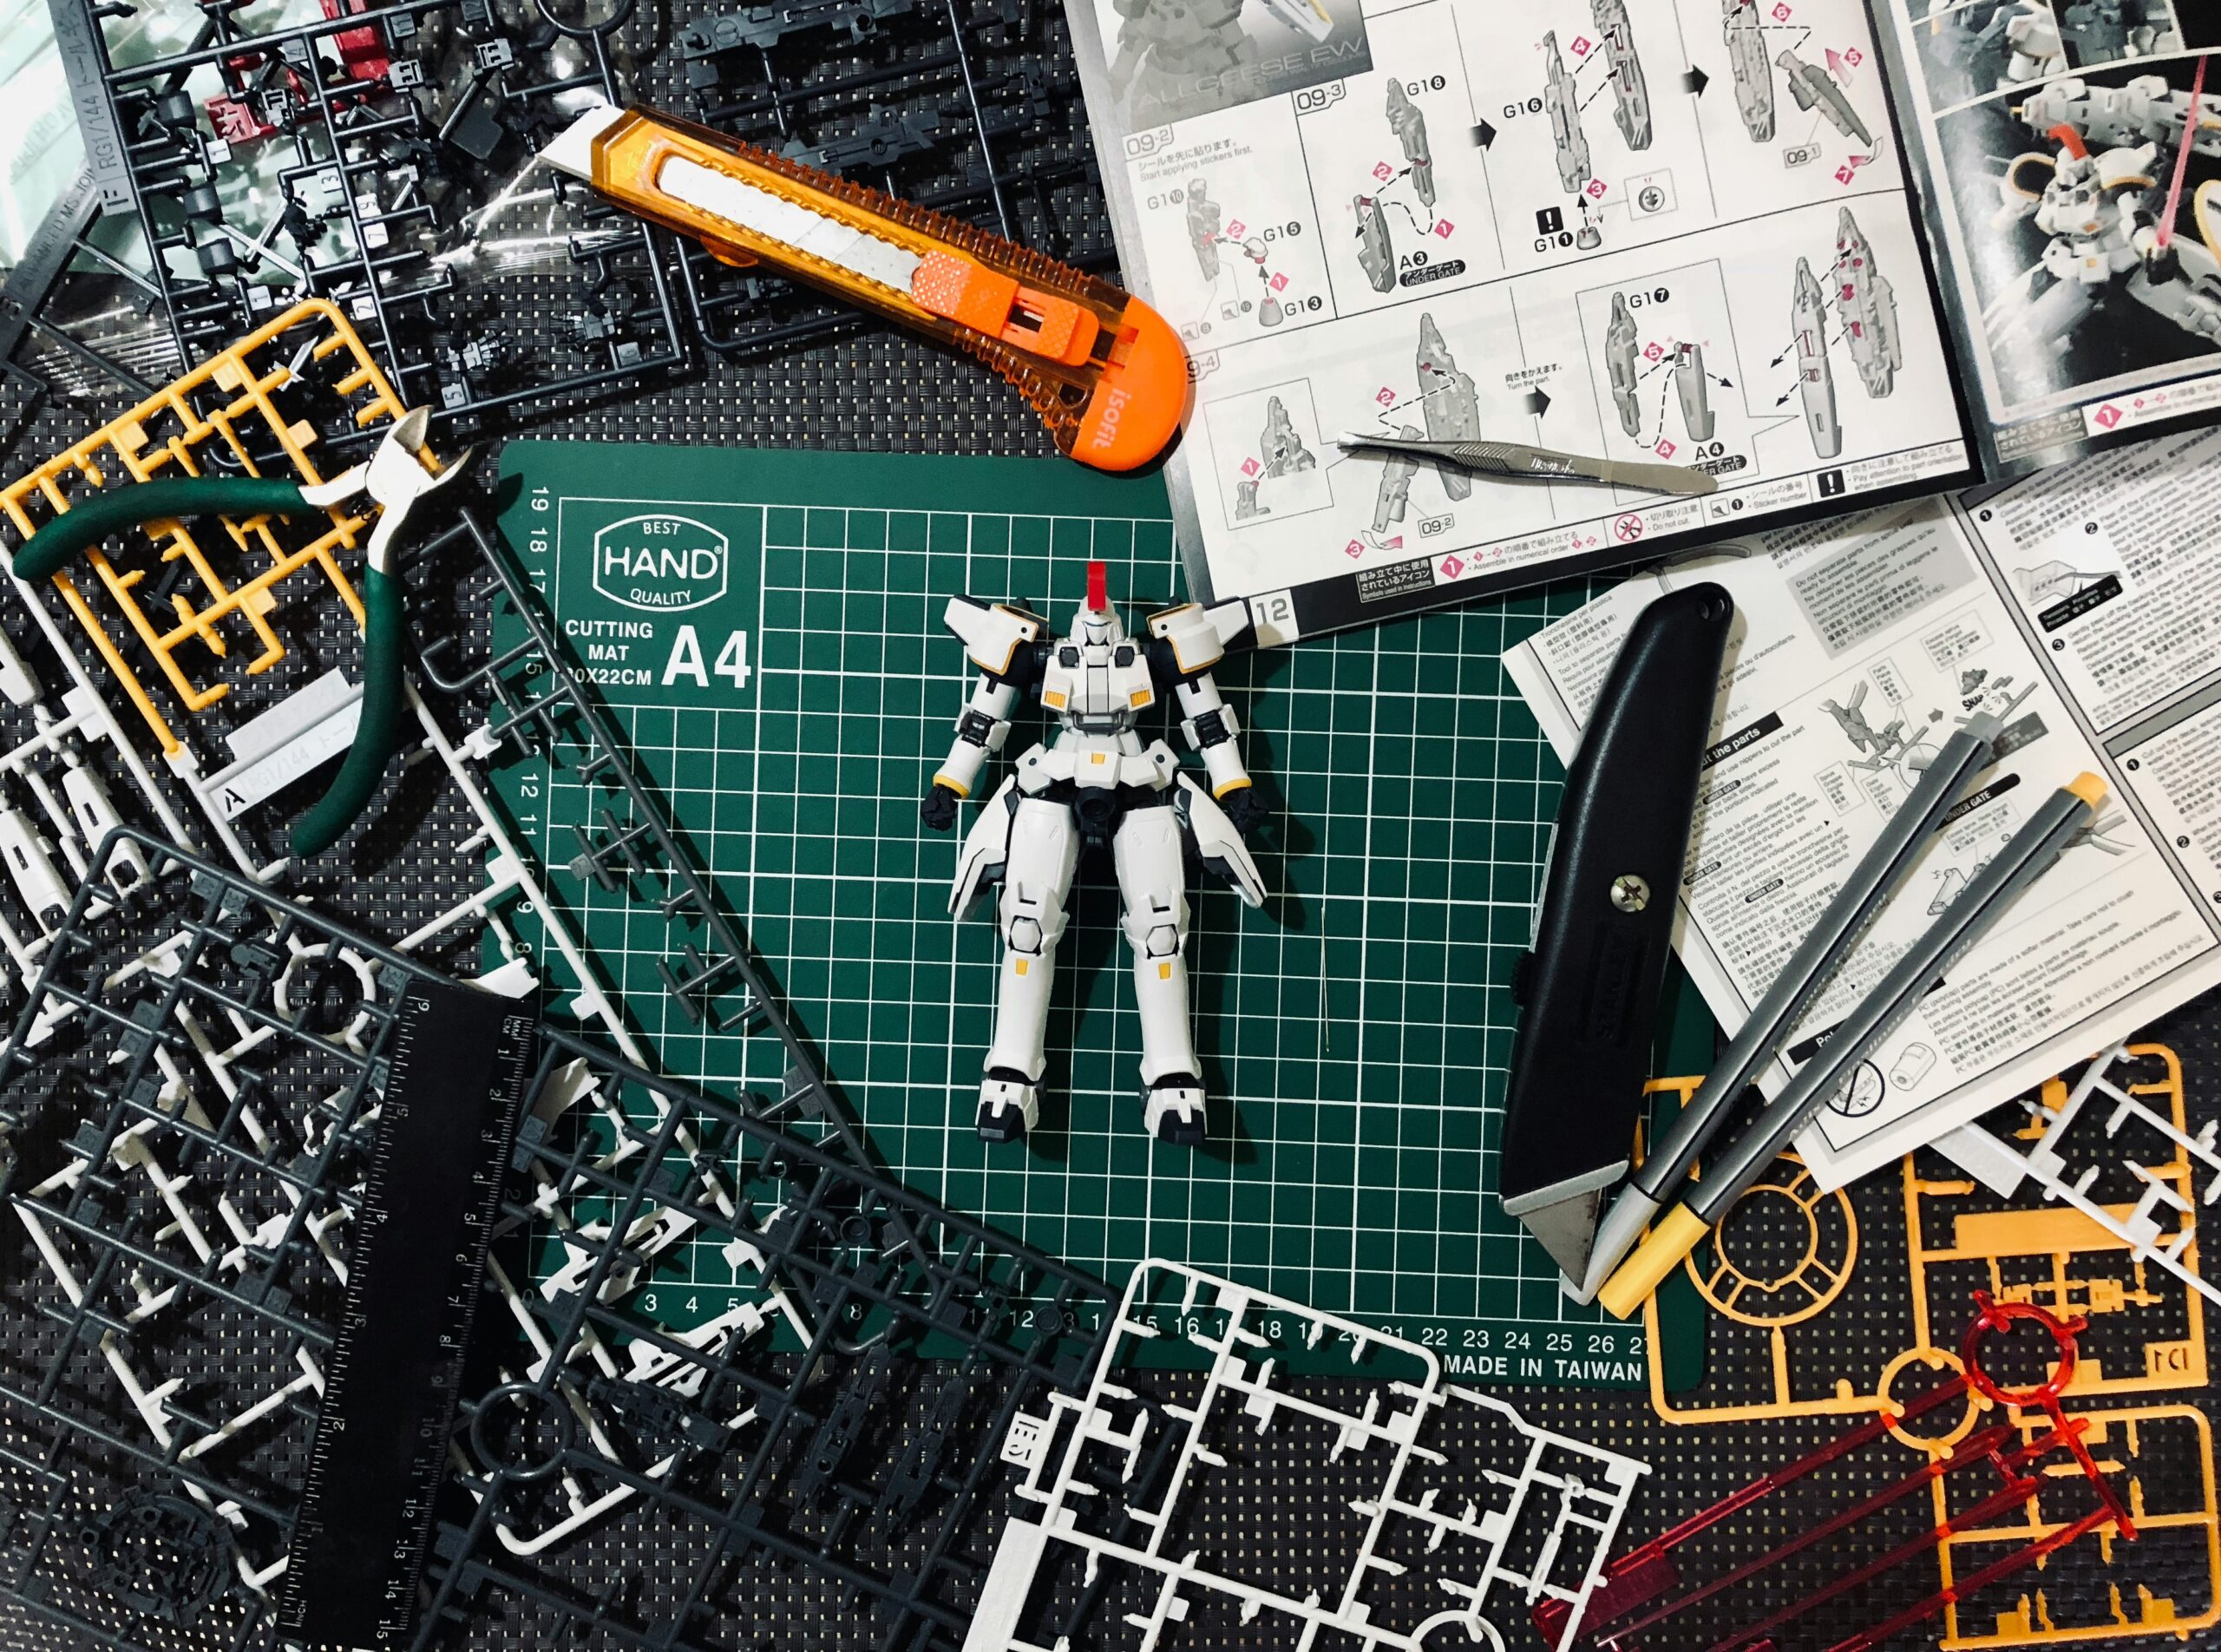 The 10 best pop culture model kits to build yourself